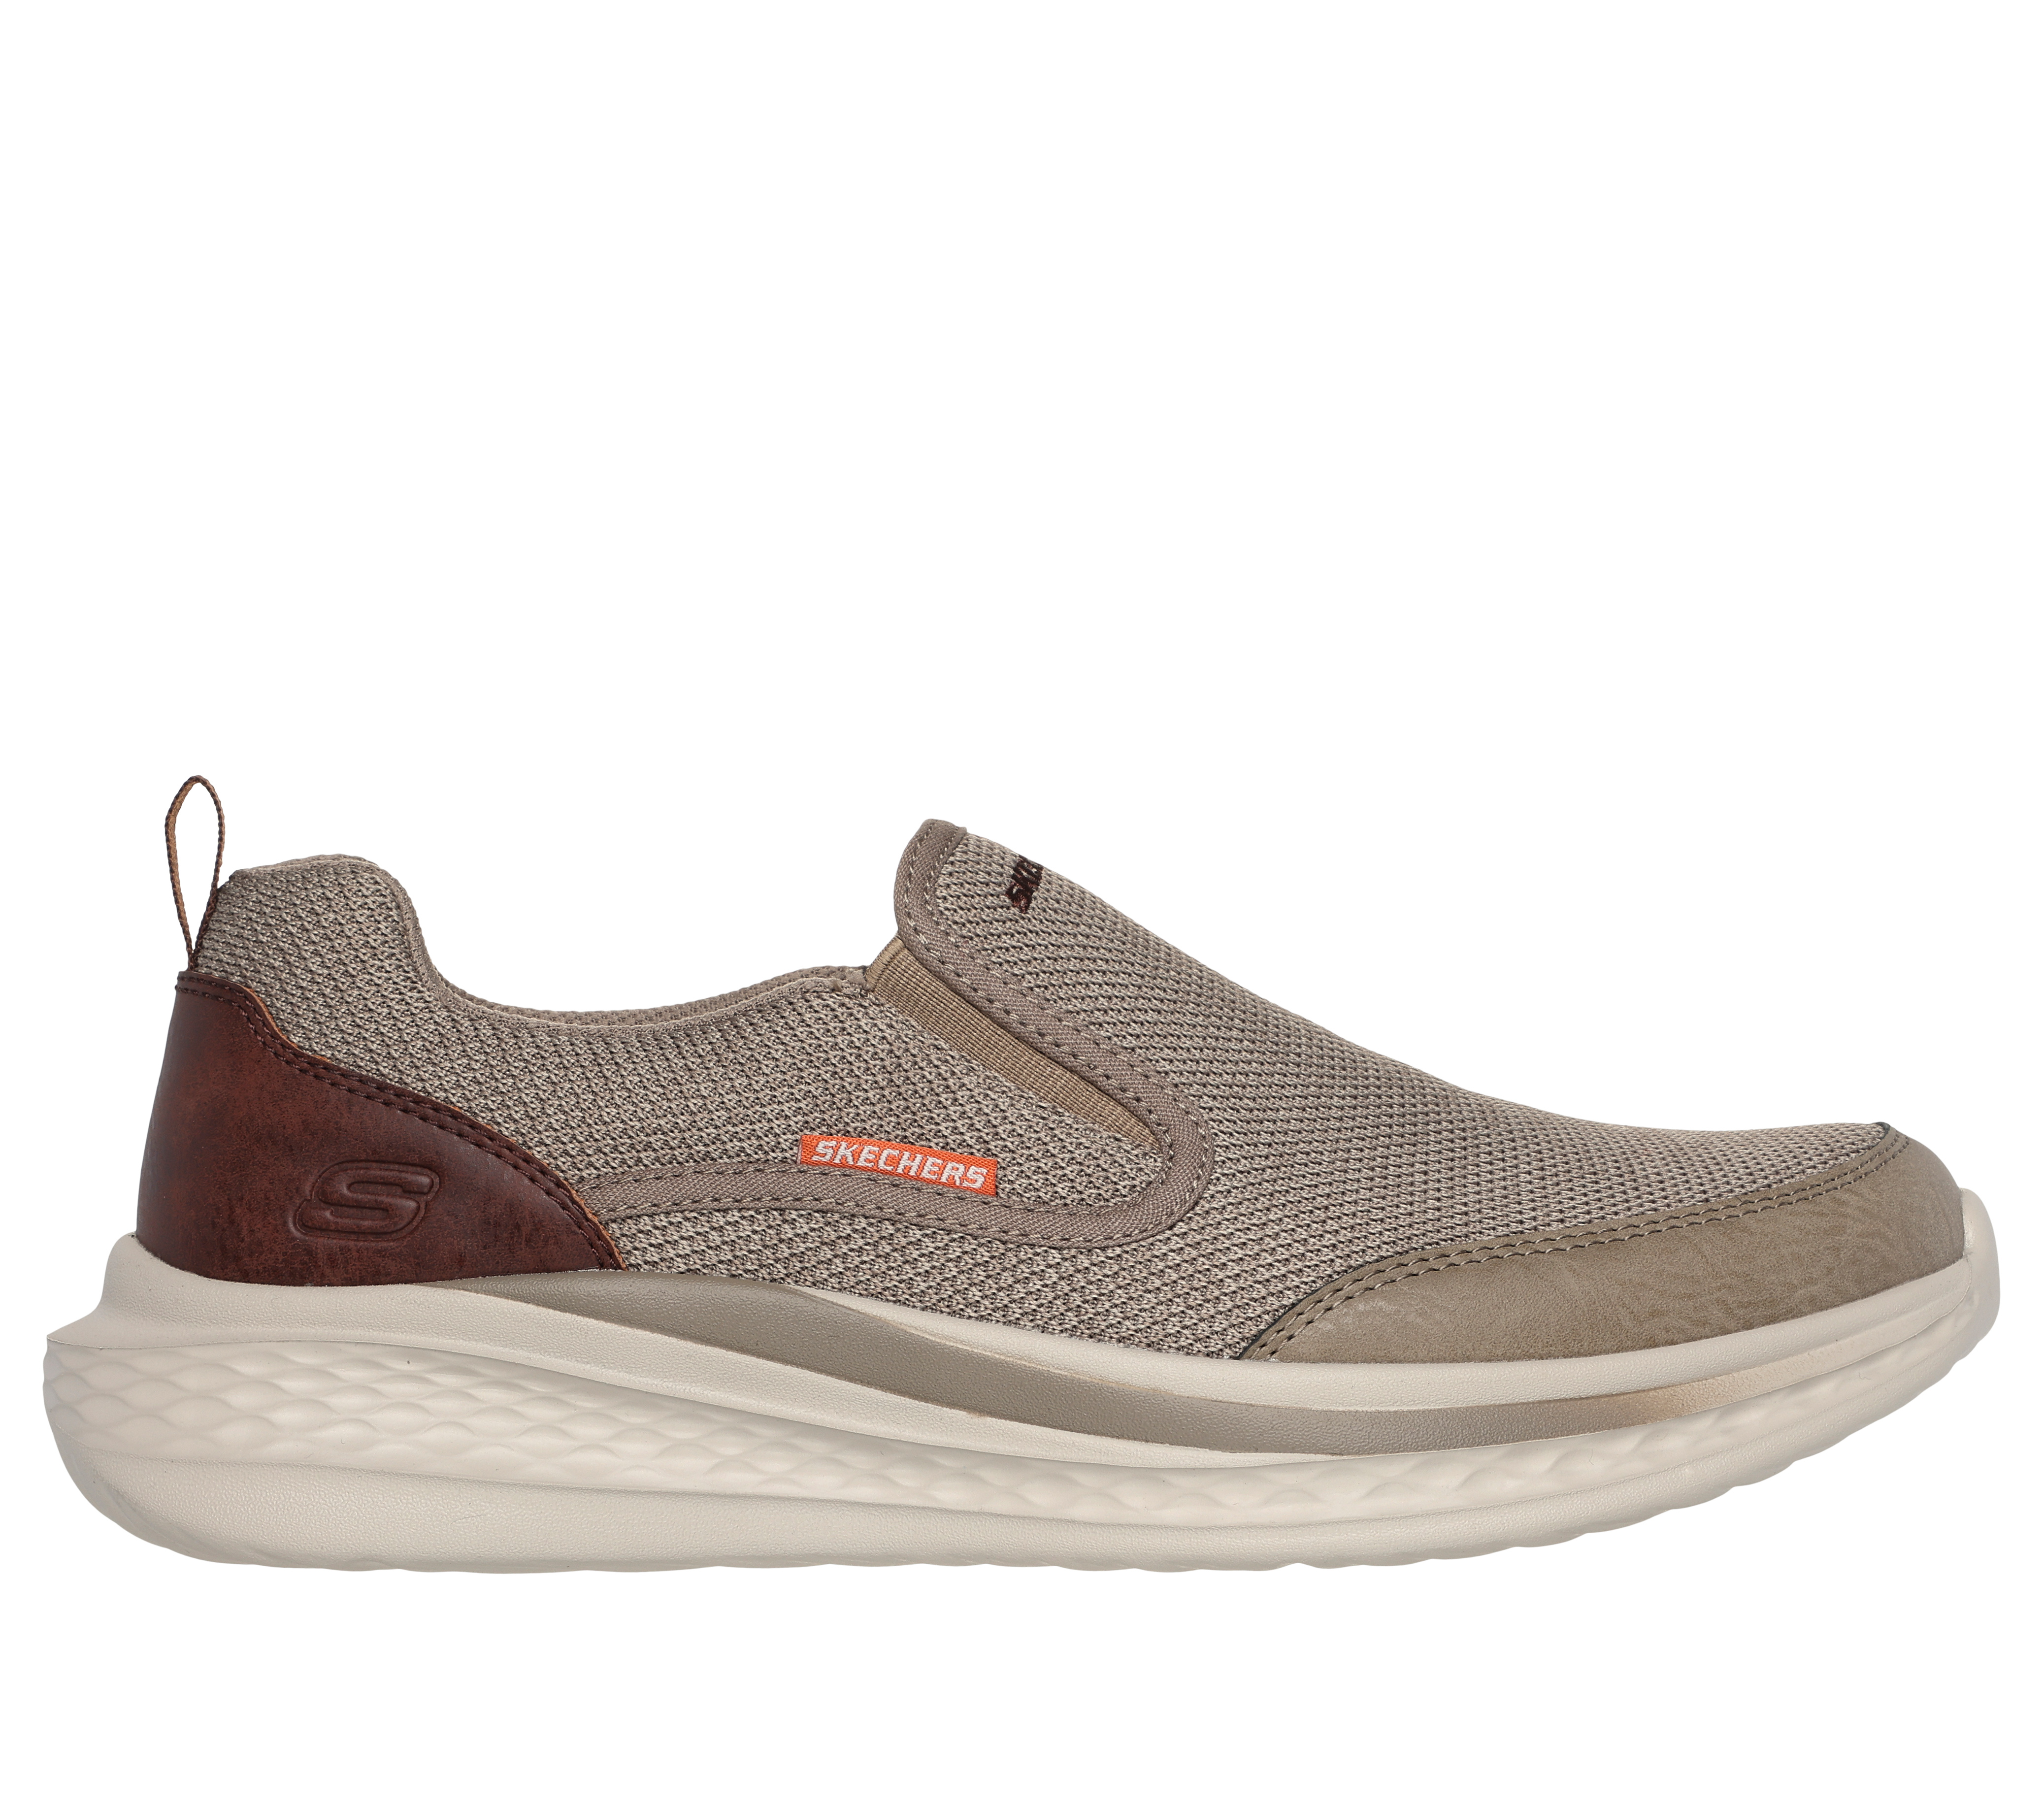 Skechers Men's Relaxed Fit: Slade - Lucan Sneaker Size 7.0 Extra Wide Khaki Textile/Synthetic Vegan Machine Washable